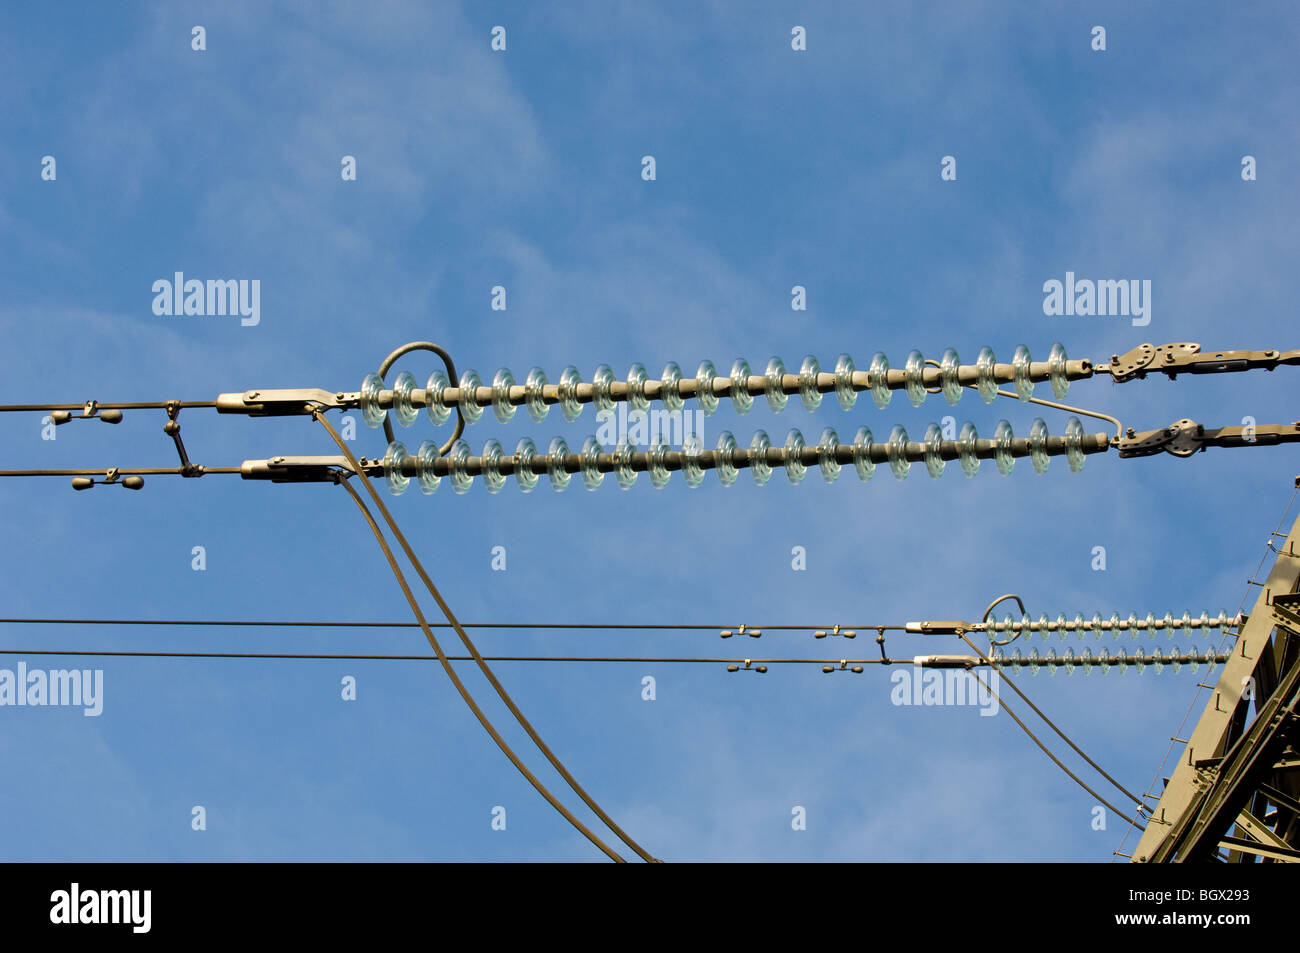 High voltage overhead cables transmission lines operating at 275kV with glass insulators. Stock Photo